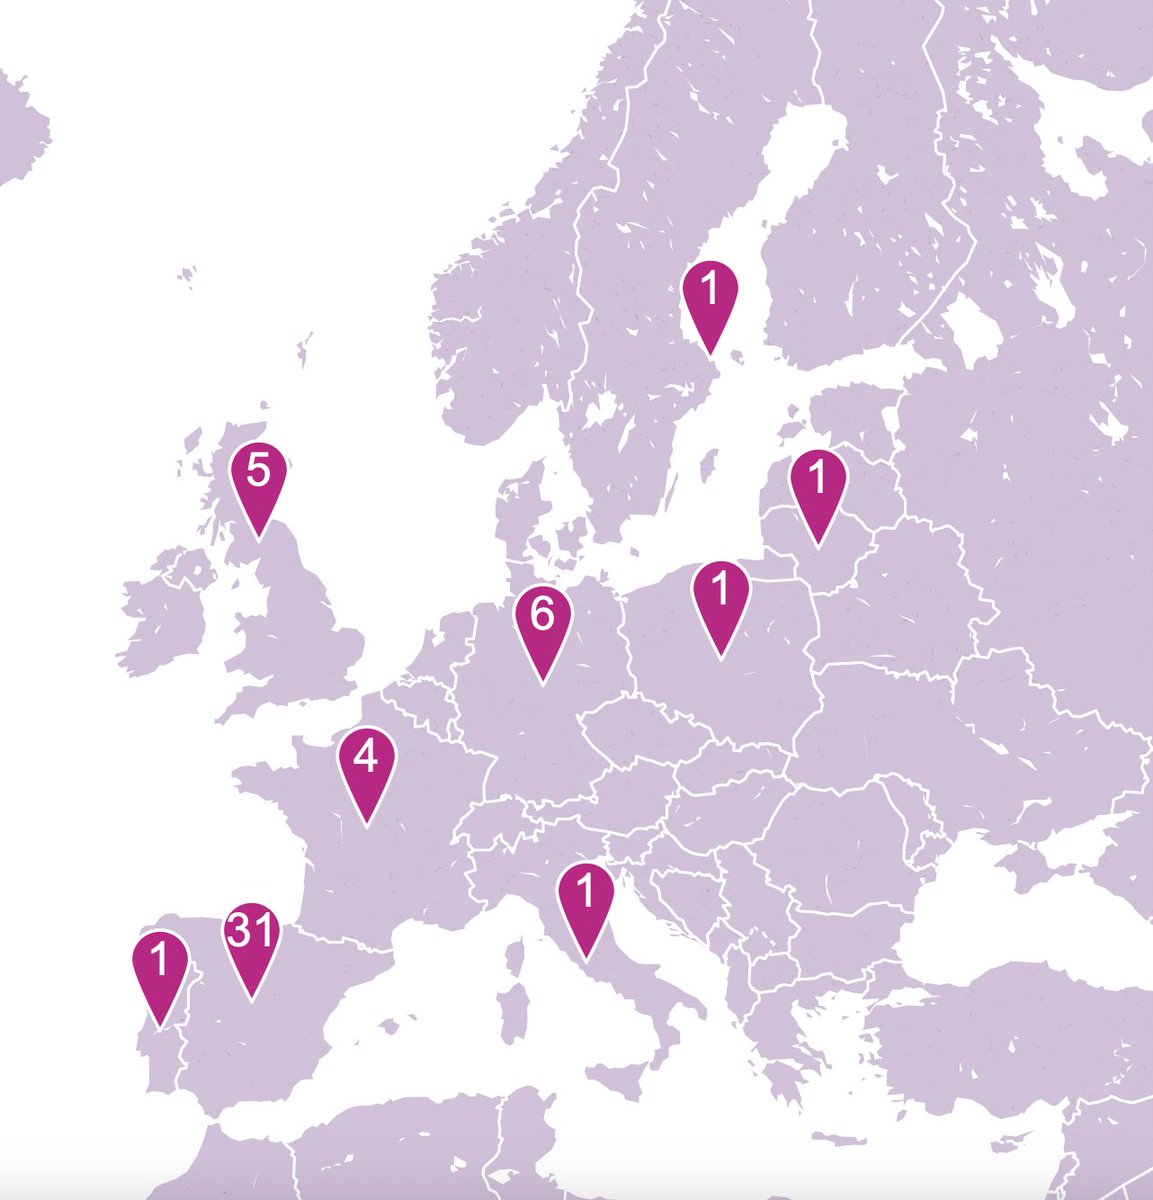 Join the #pancreaticcancer map created by @P_C_E_ 💜 The aim of the PCE Research Map is to show all 🇪🇺 #pancreaticcancer research groups in one map 🌍 Want to add YOUR group to this map? 👉research@pancreaticcancereurope.eu 👉…arch-groups.pancreaticcancereurope.eu